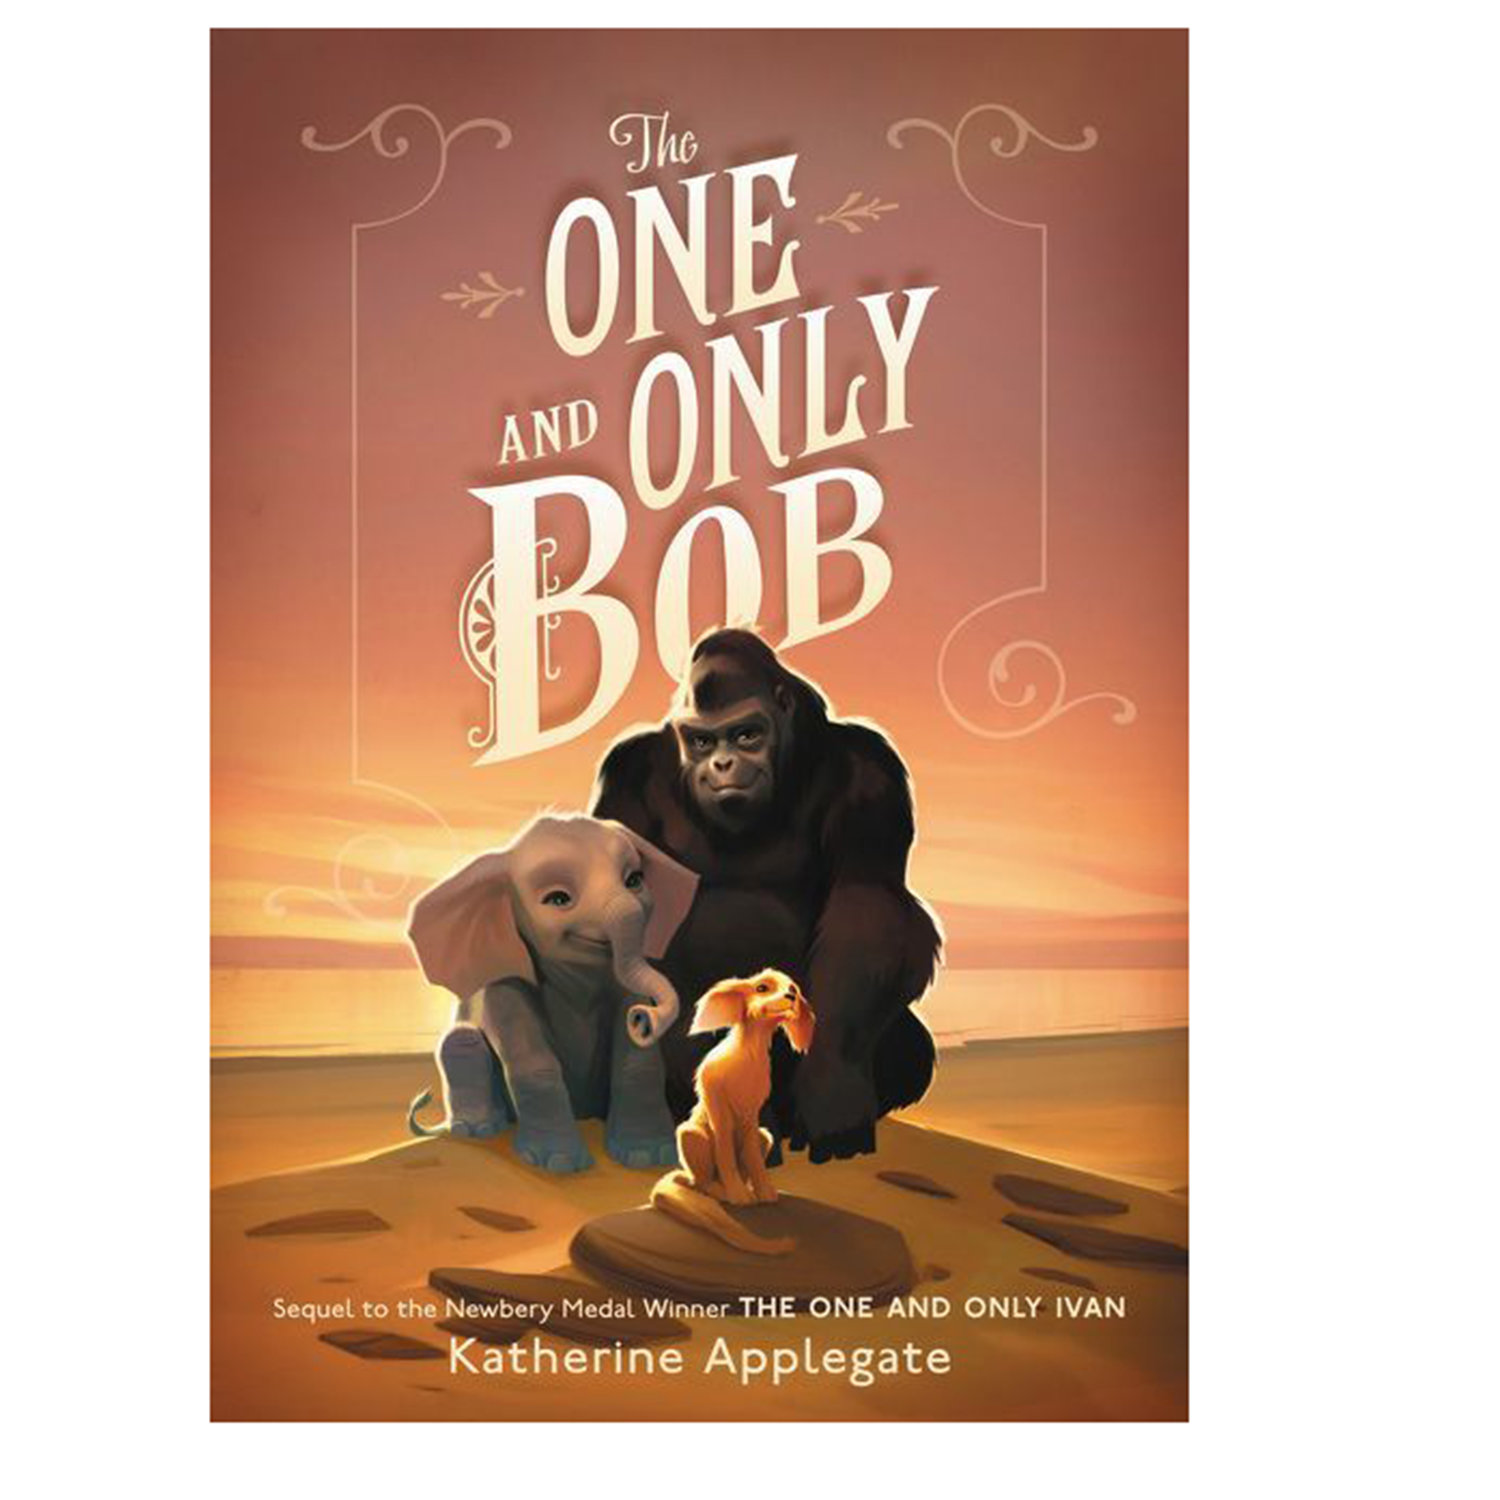 The One and Only Bob By Katherine Applegate